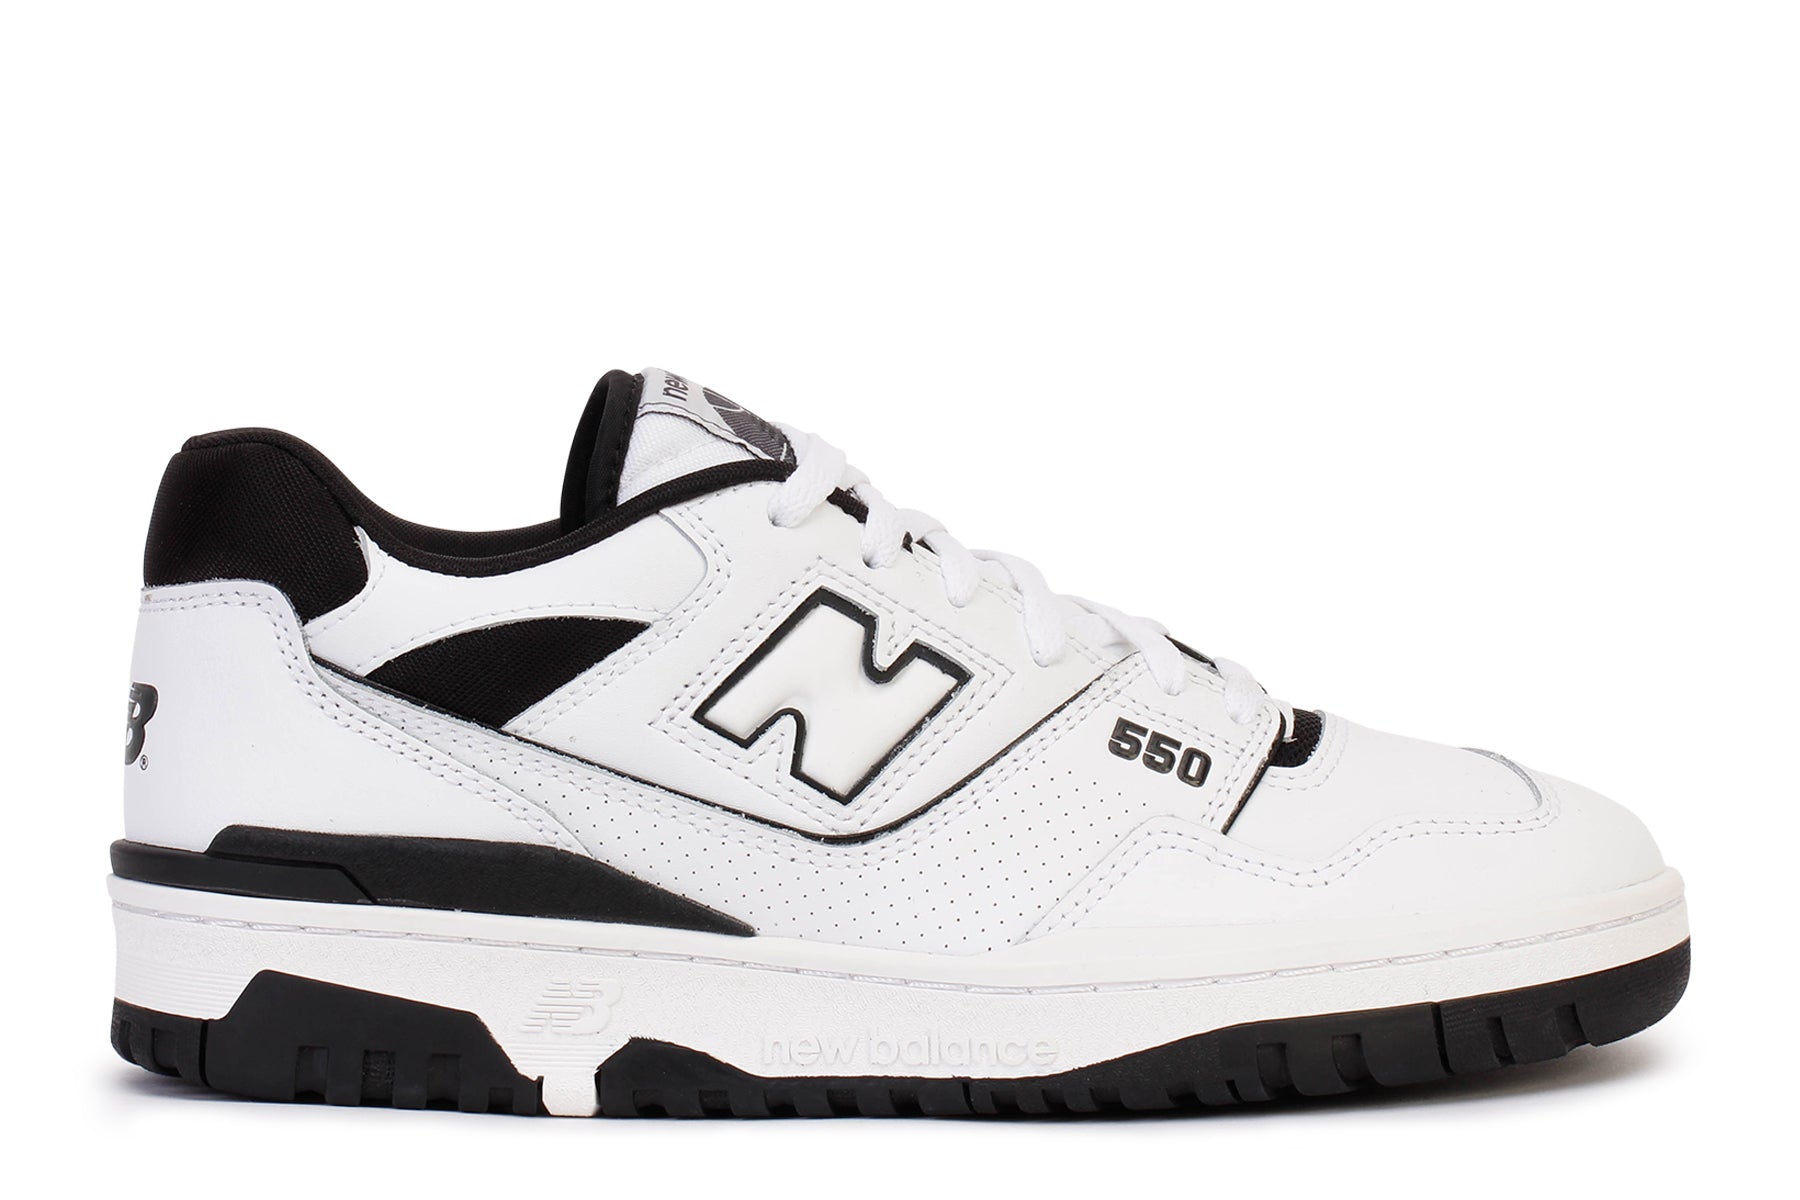 New Balance 550 sneakers in white and black